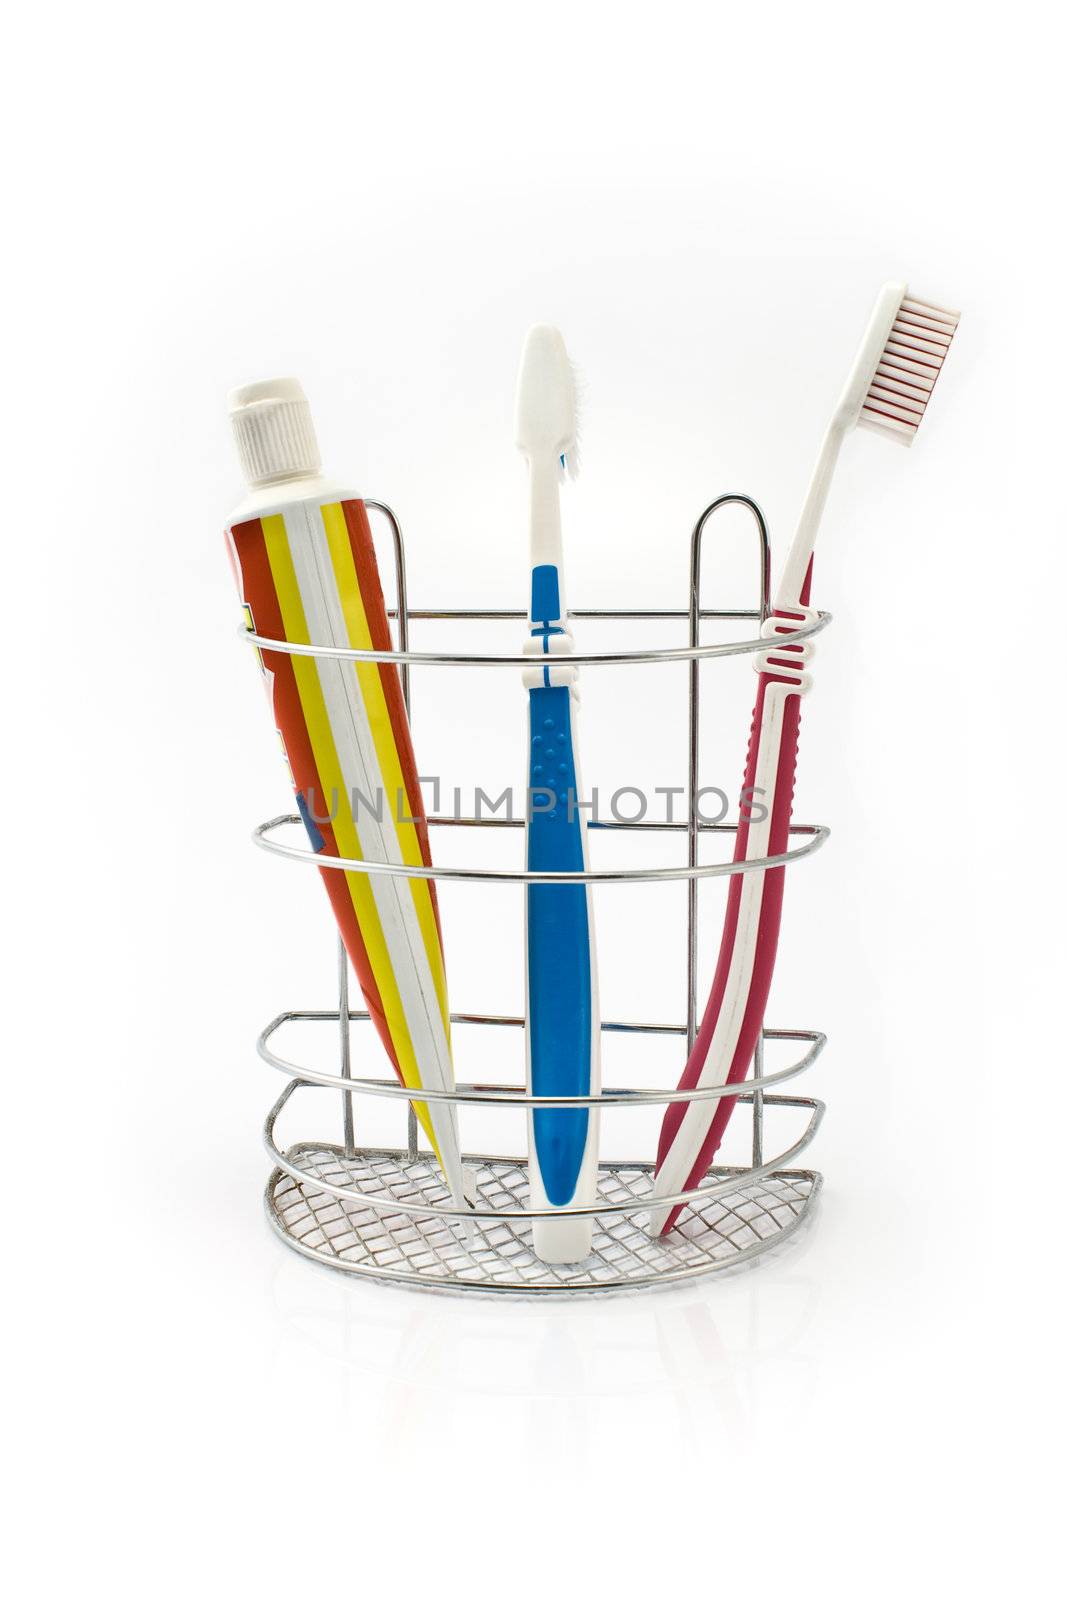 Tooth brushes beside toothpaste isolated on white